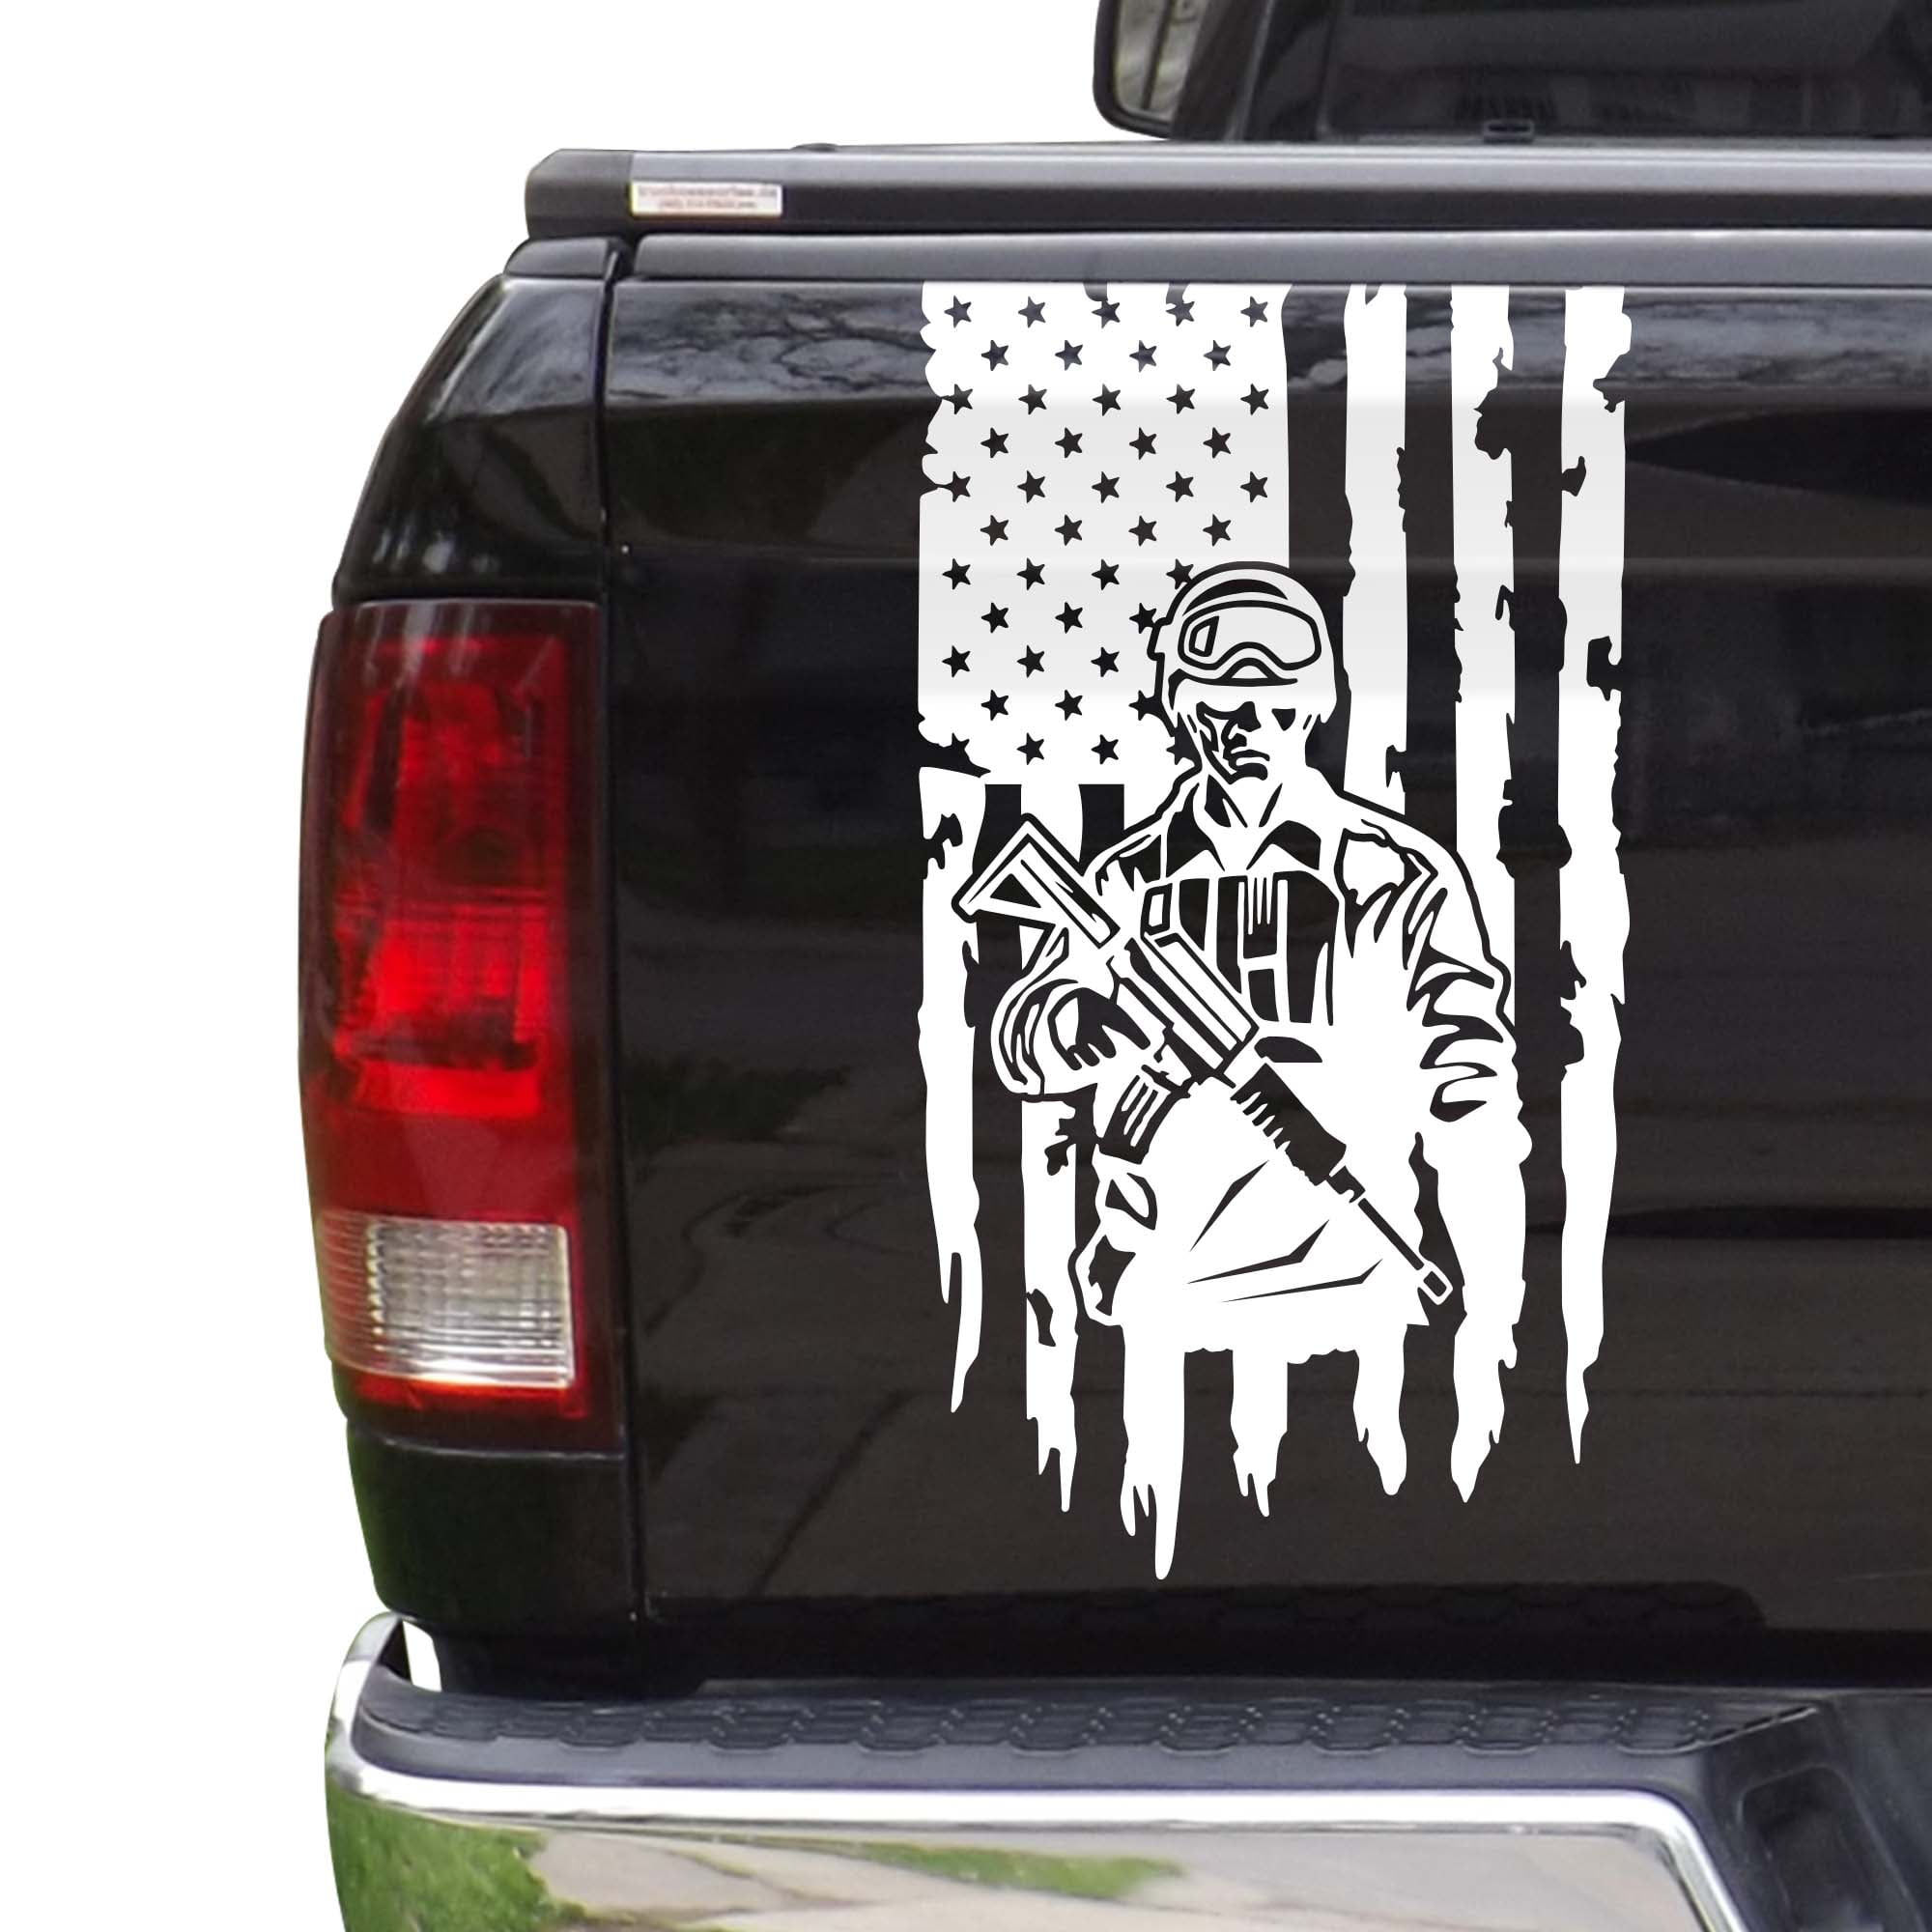 Soldier Enlisted Man Fighter U.S. Army USMC USAF Distressed American USA US  Flag Truck Tailgate Vinyl Decal Fits most Pickup Trucks Military Sticker  Veteran Retired (11 x 20, Copper (Metallic)) 